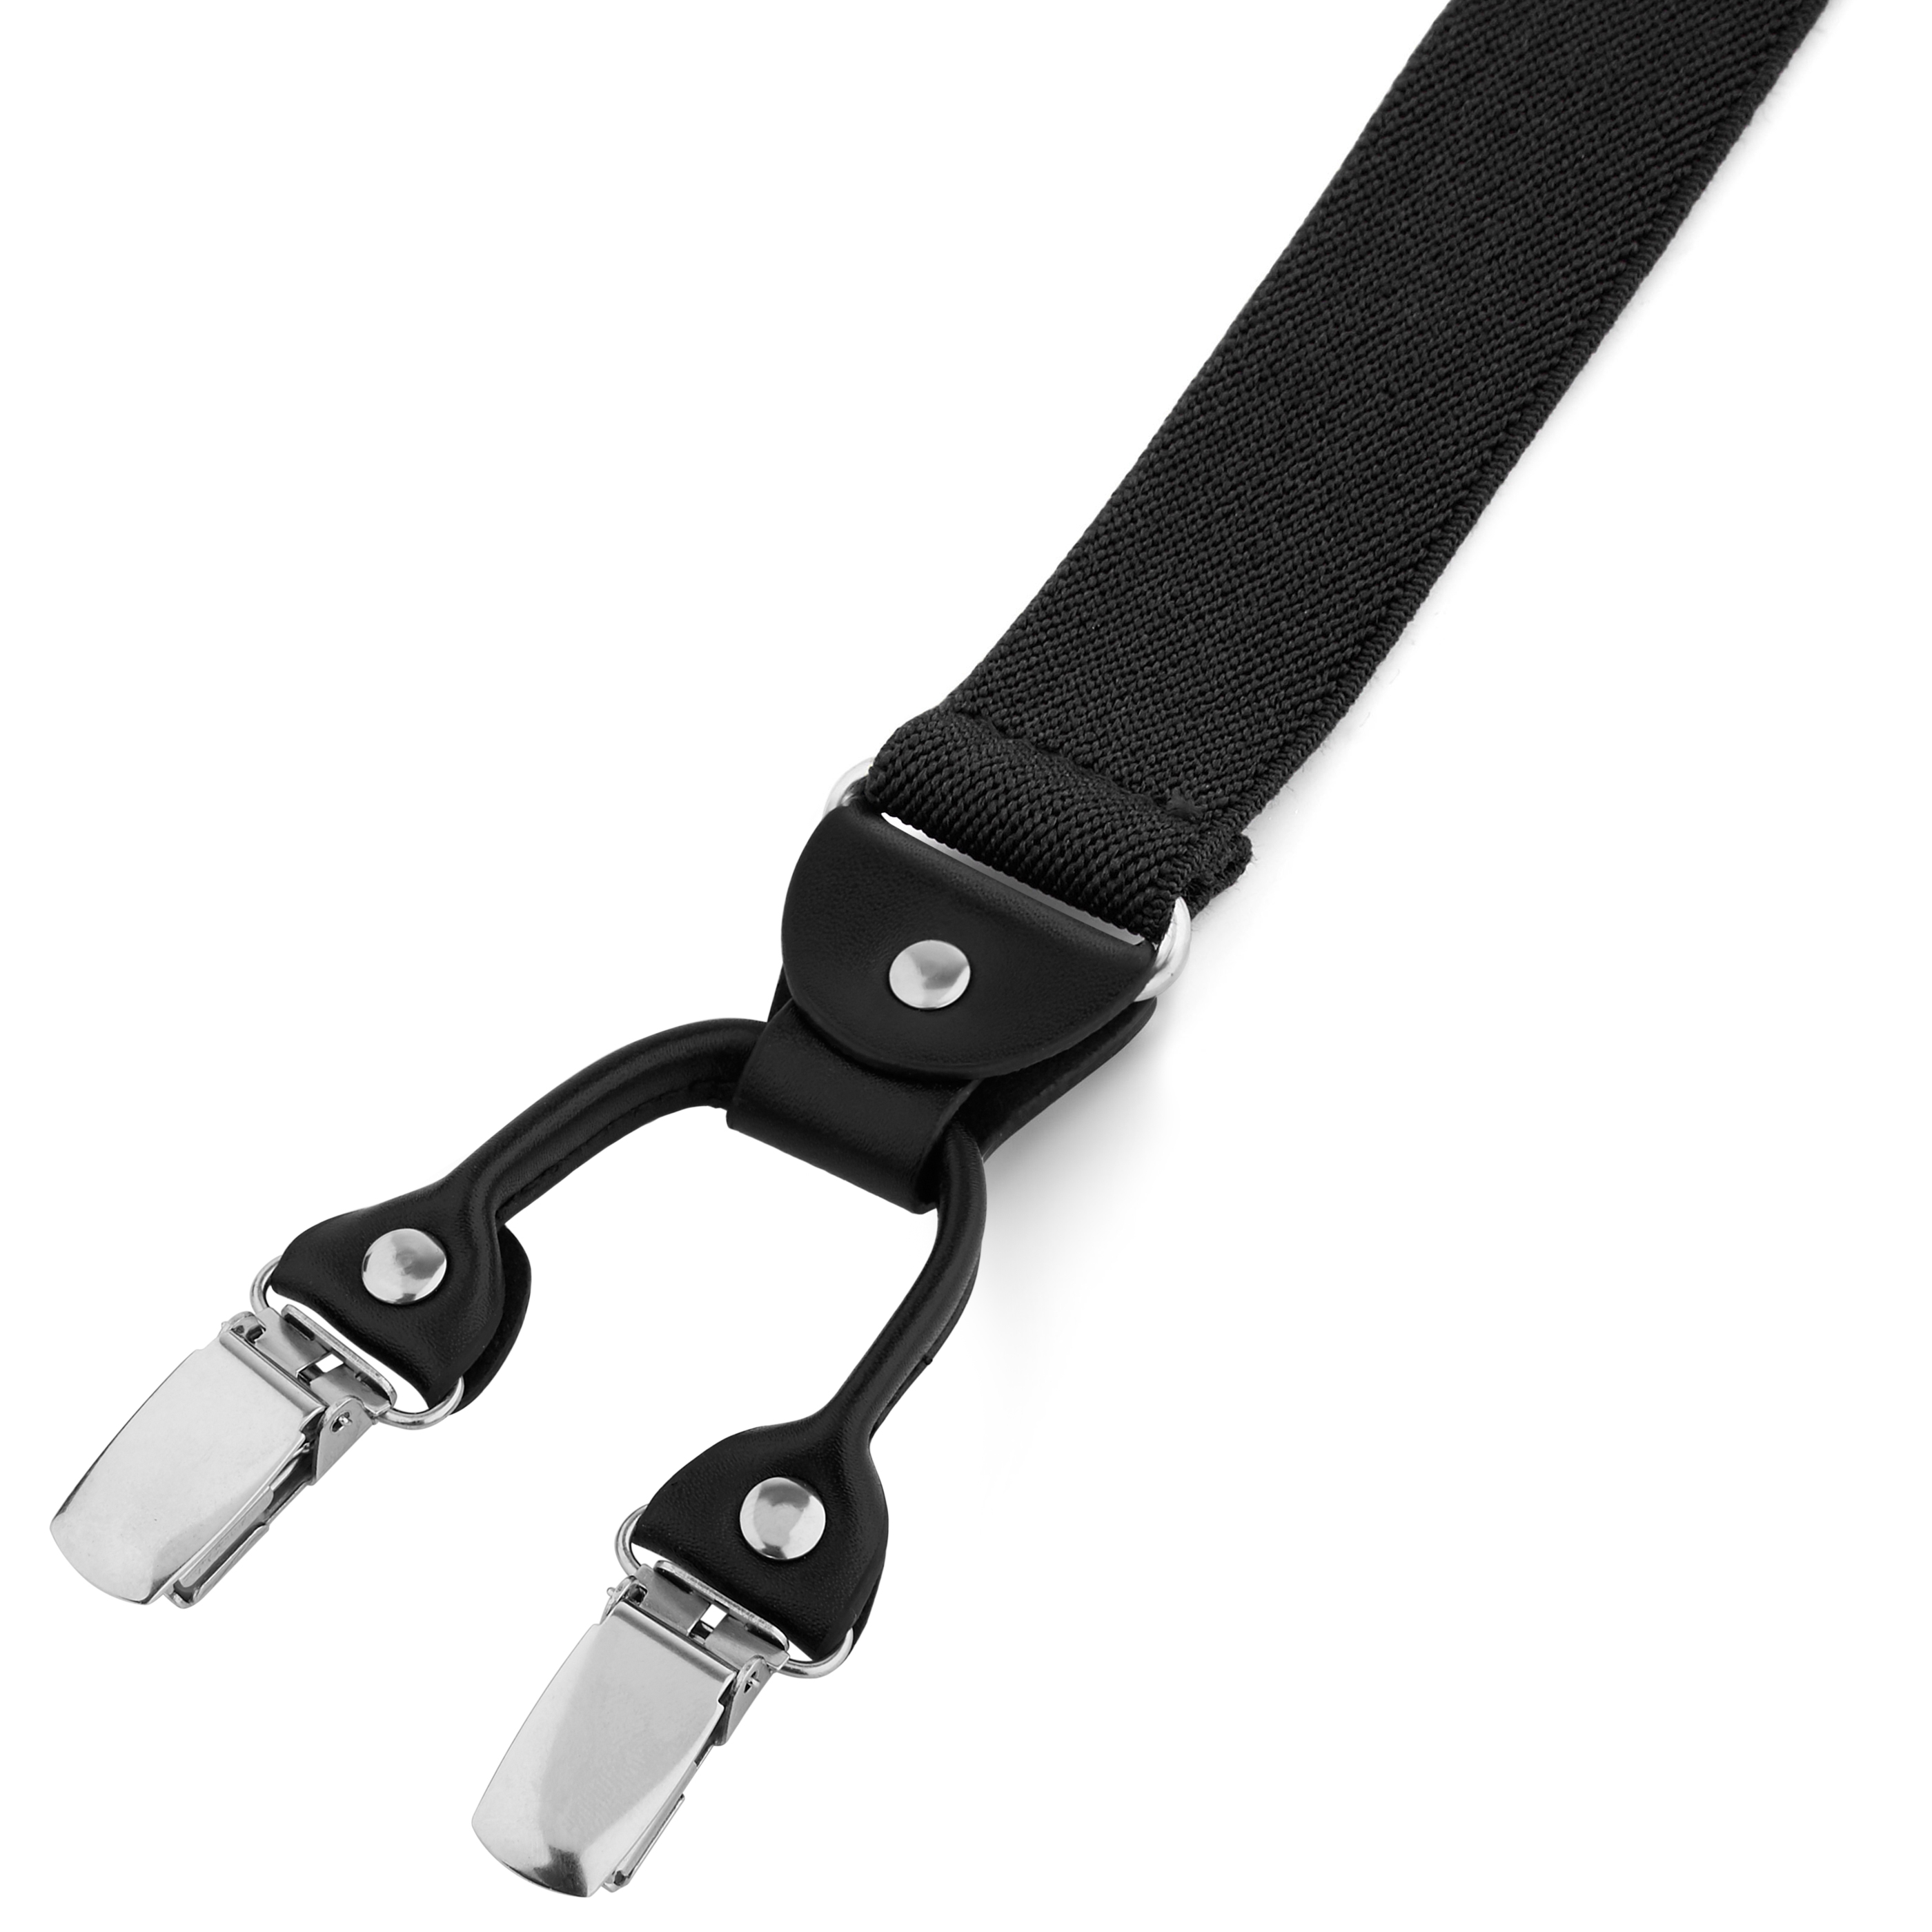 Dropshipping Elastic nylon 35mm wide durable and adjustable trouser braces  suspender - Black - Go Dropship